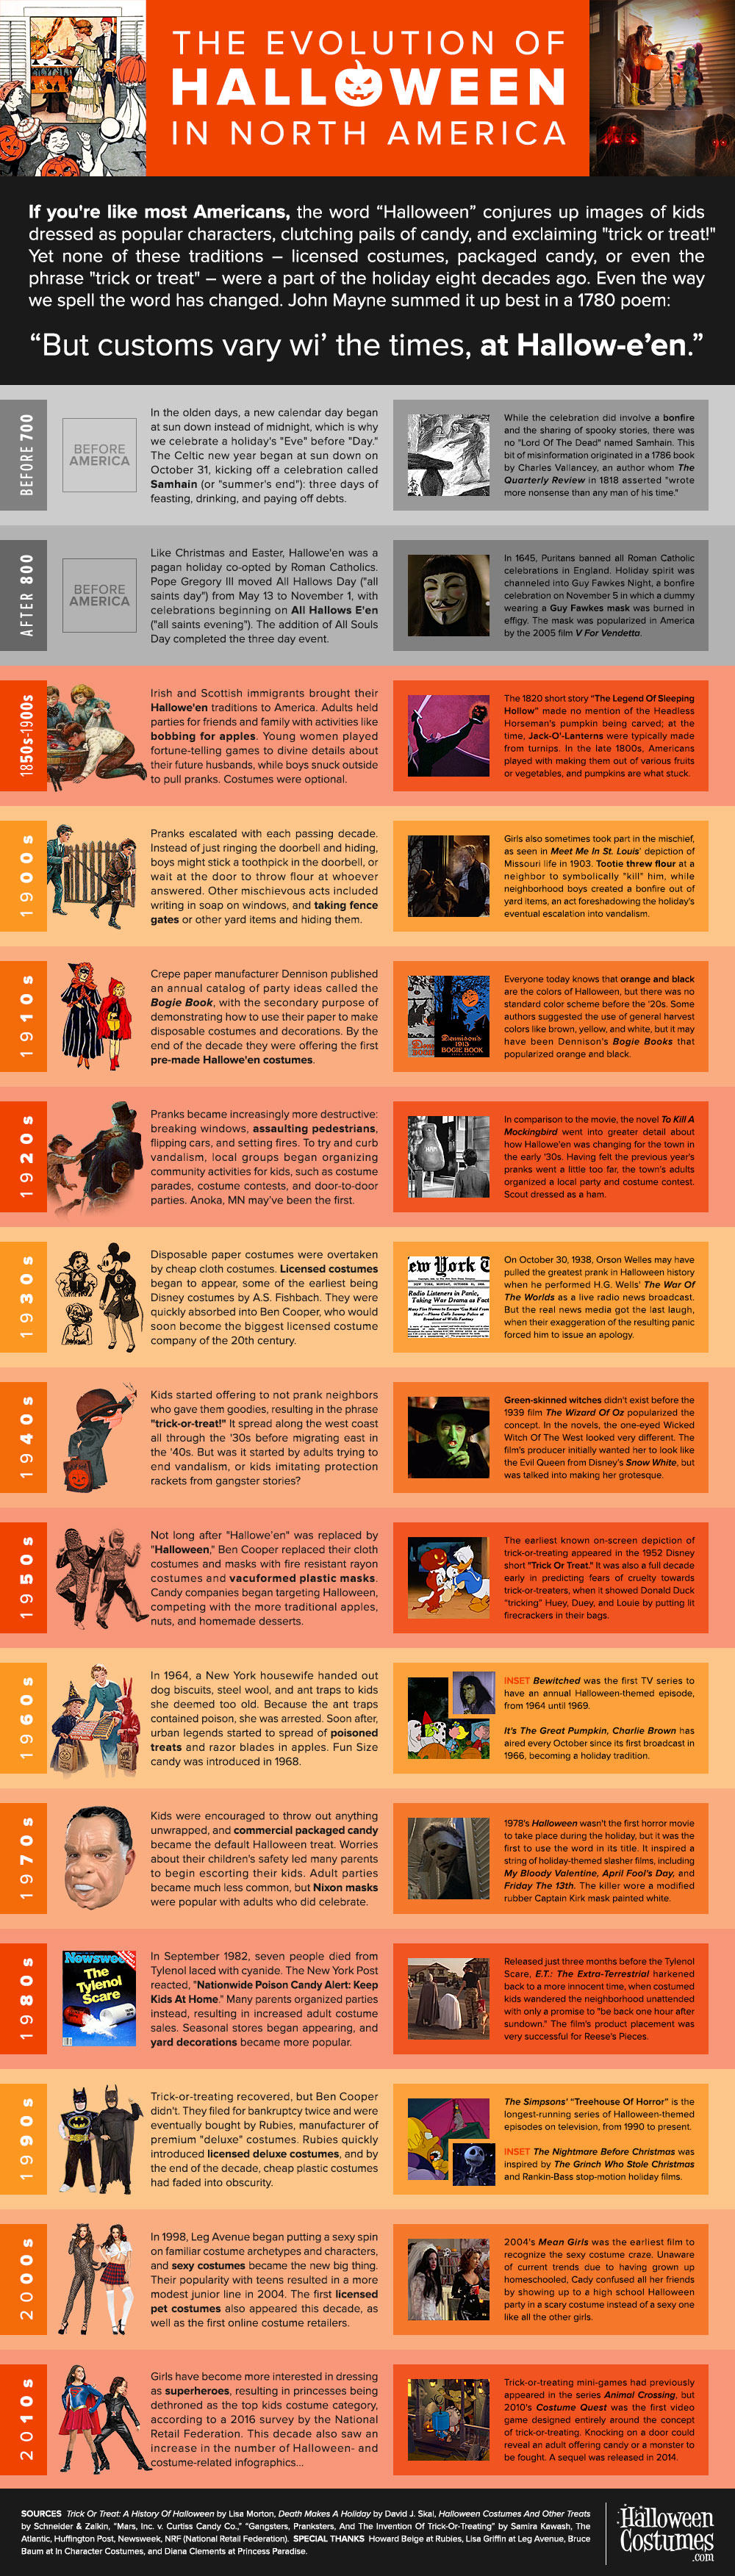 The Evolution of Halloween in North America Infographic - FactsandHistory